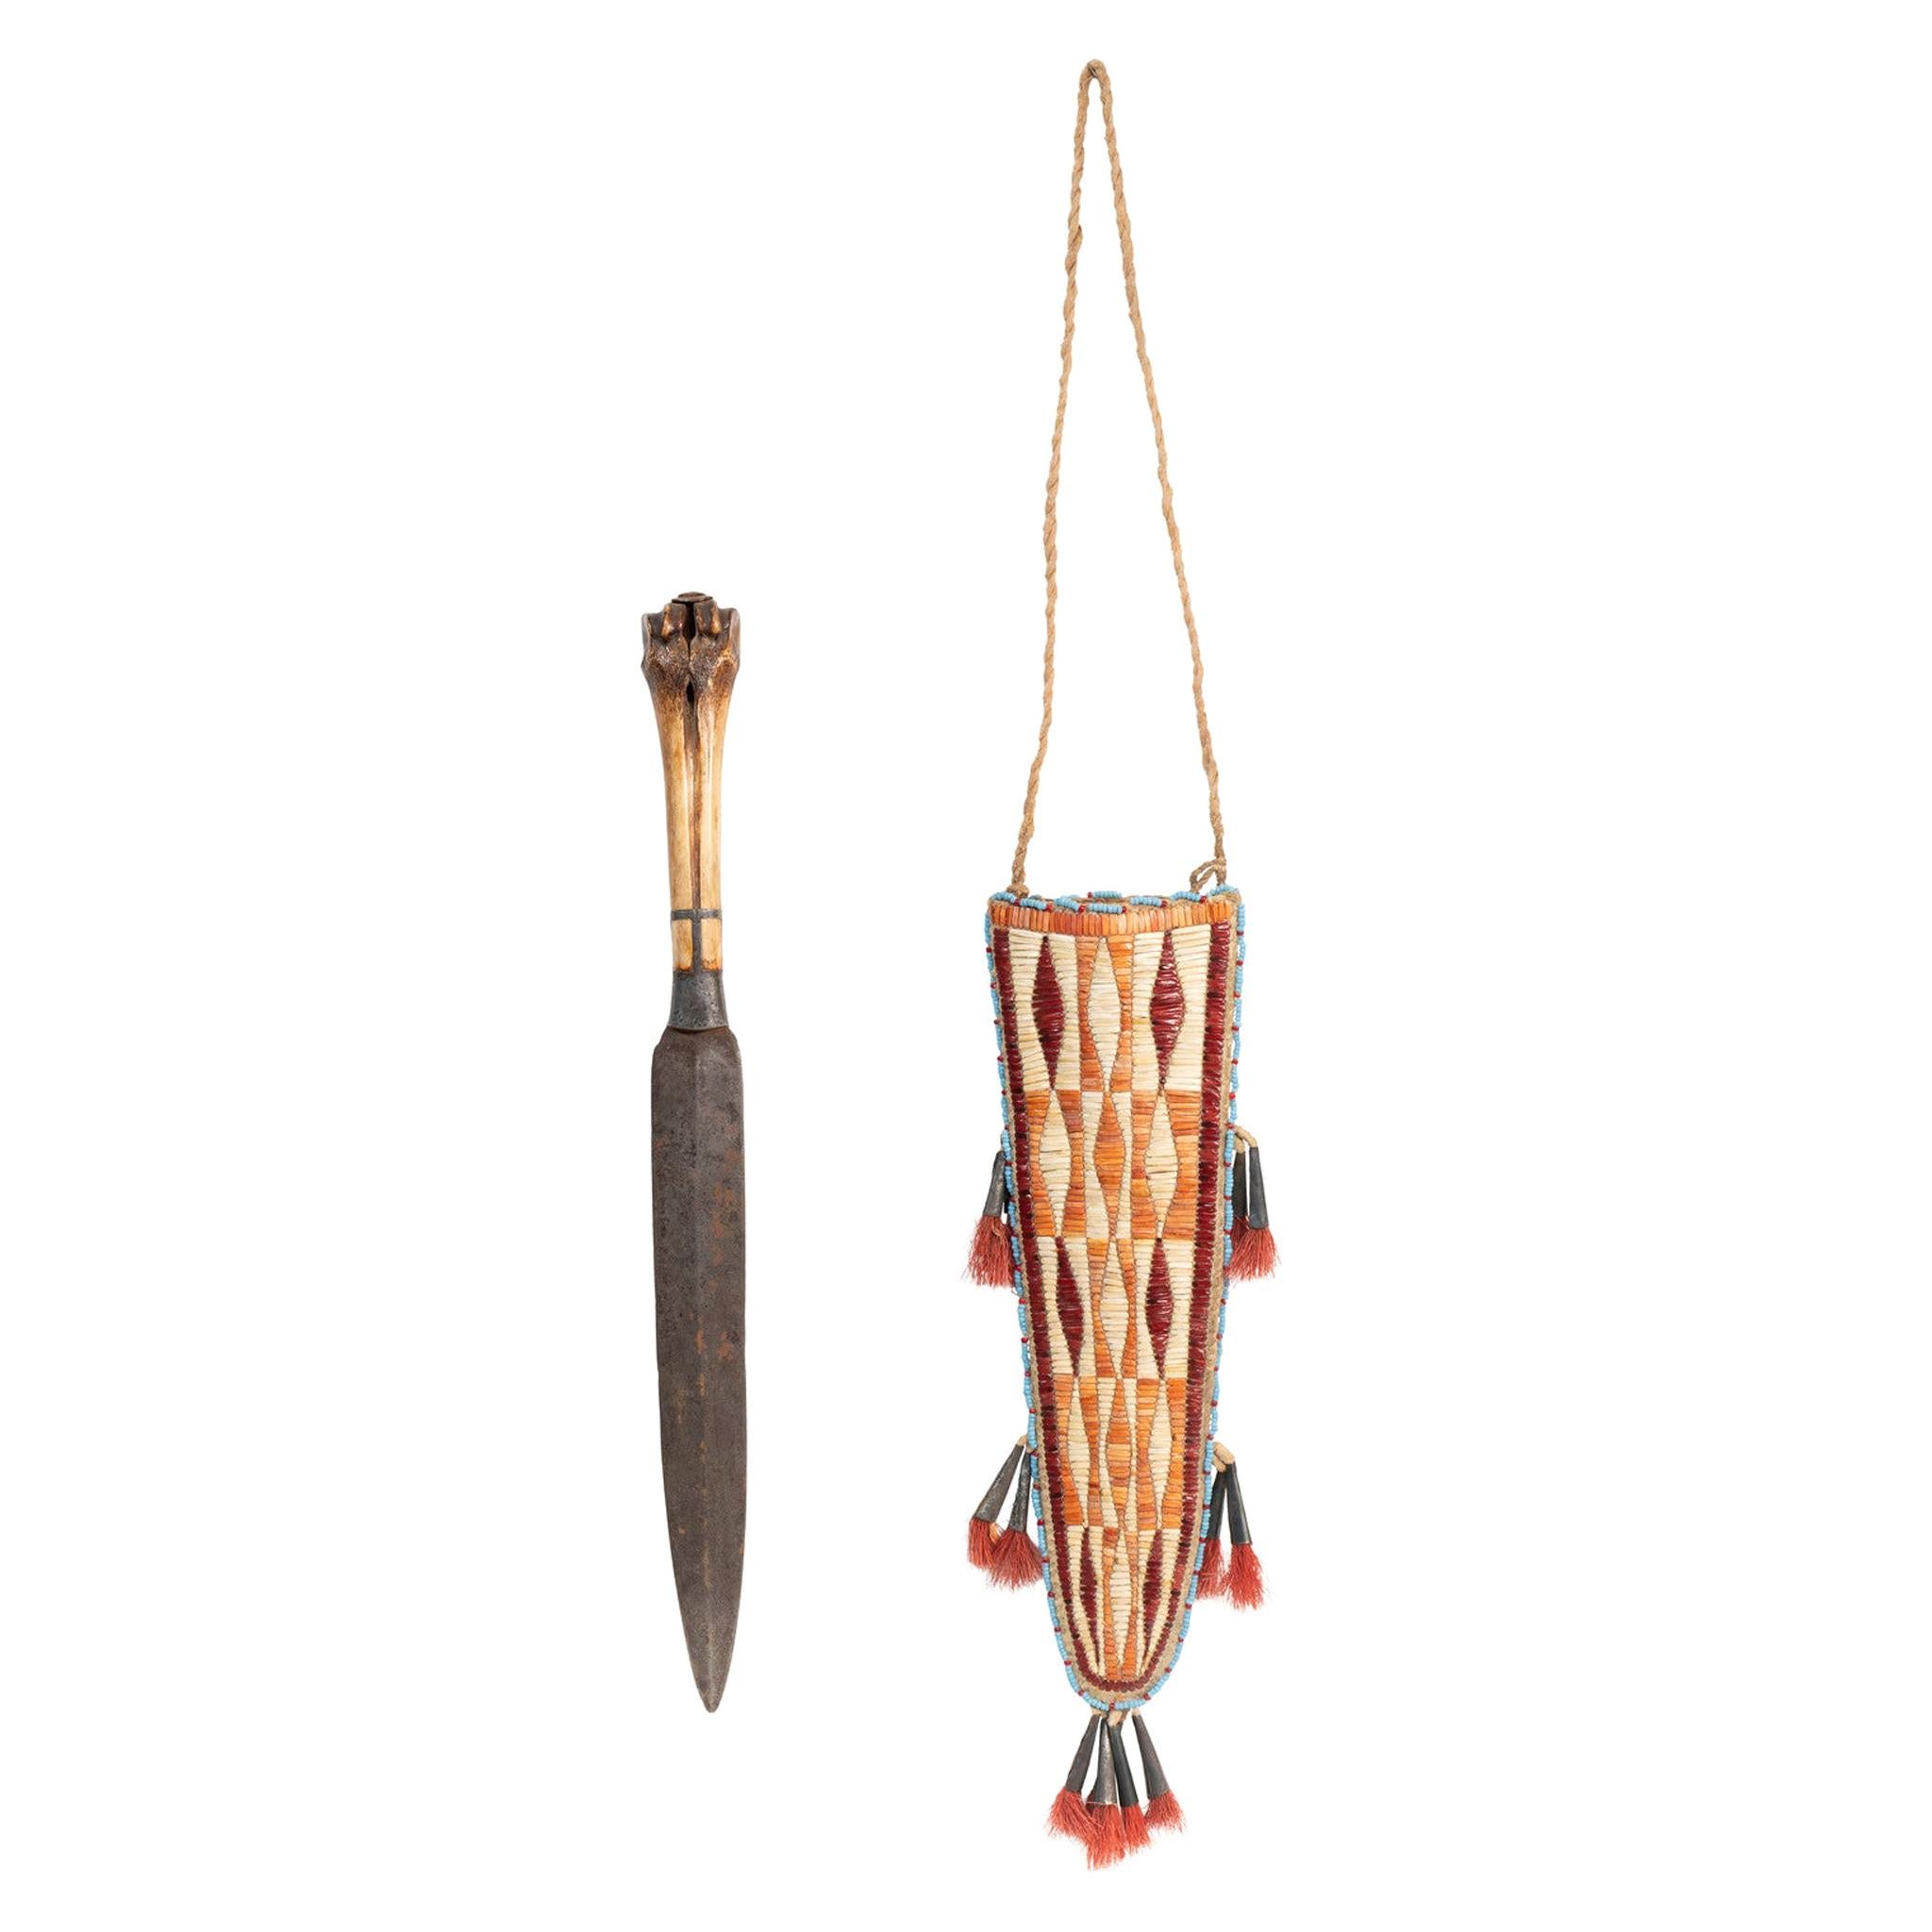 Yankton Sioux Quilled Knife and Sheath